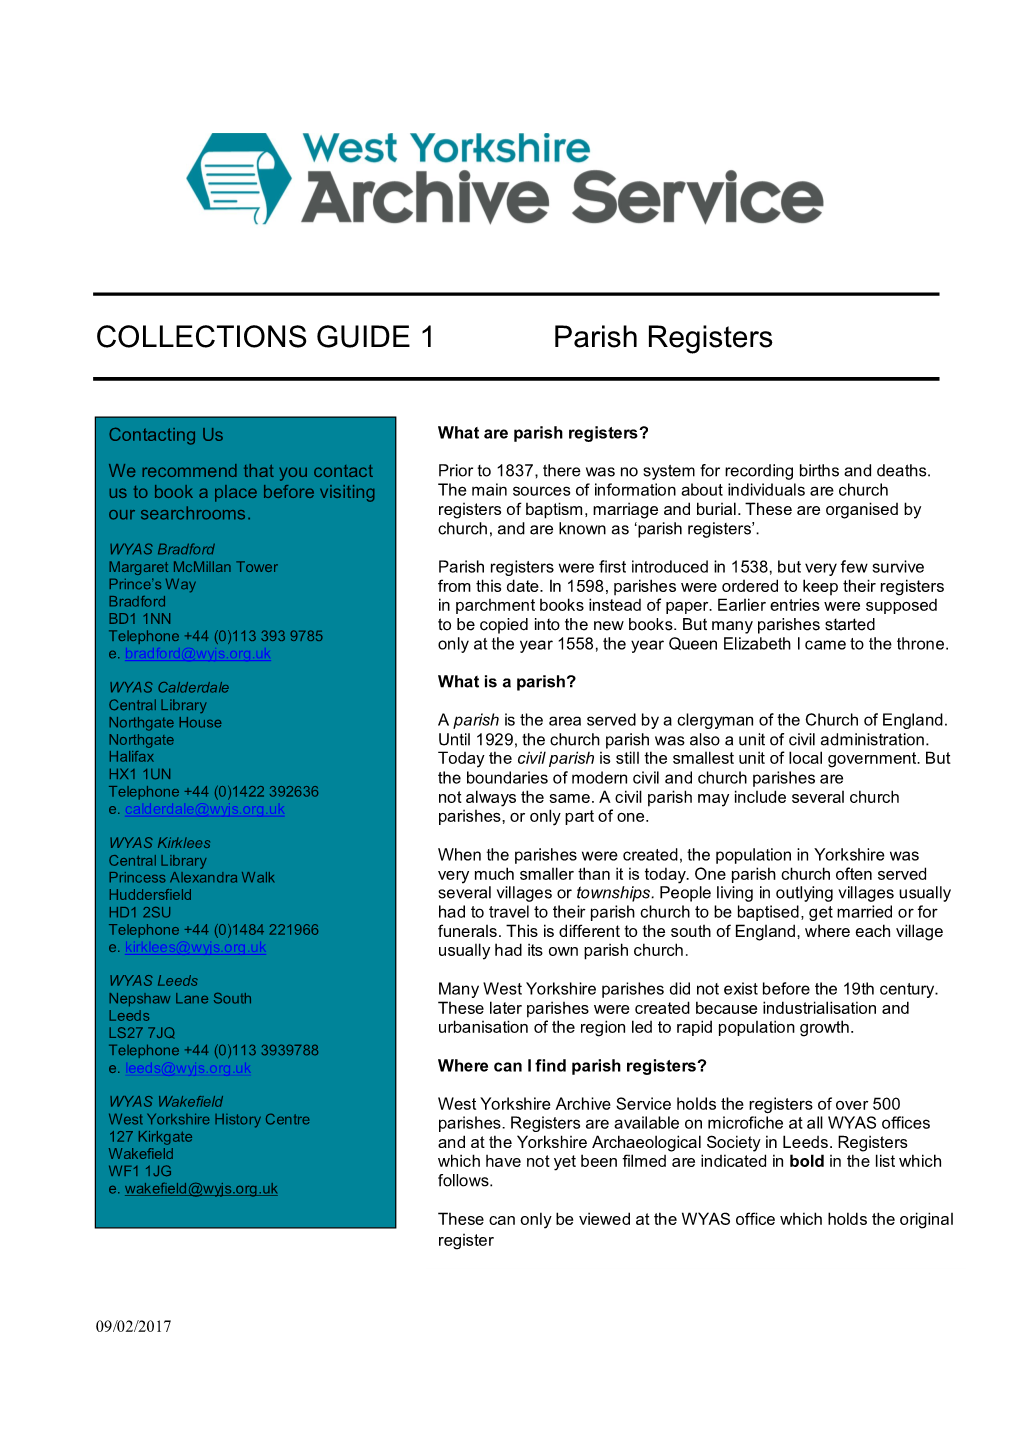 COLLECTIONS GUIDE 1 Parish Registers